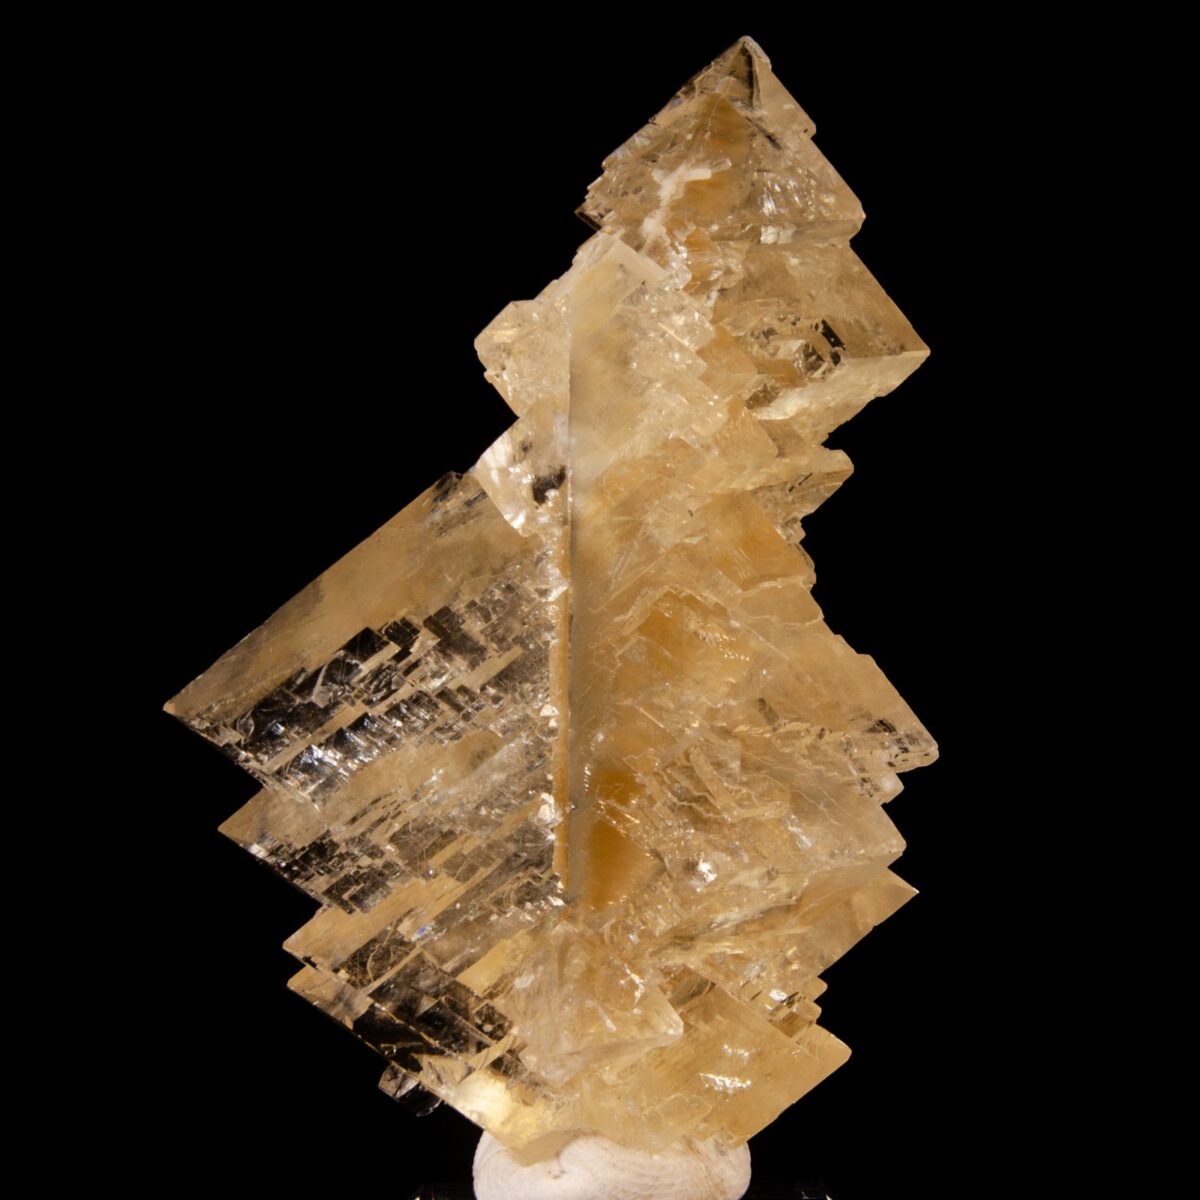 Calcite twinned crystals